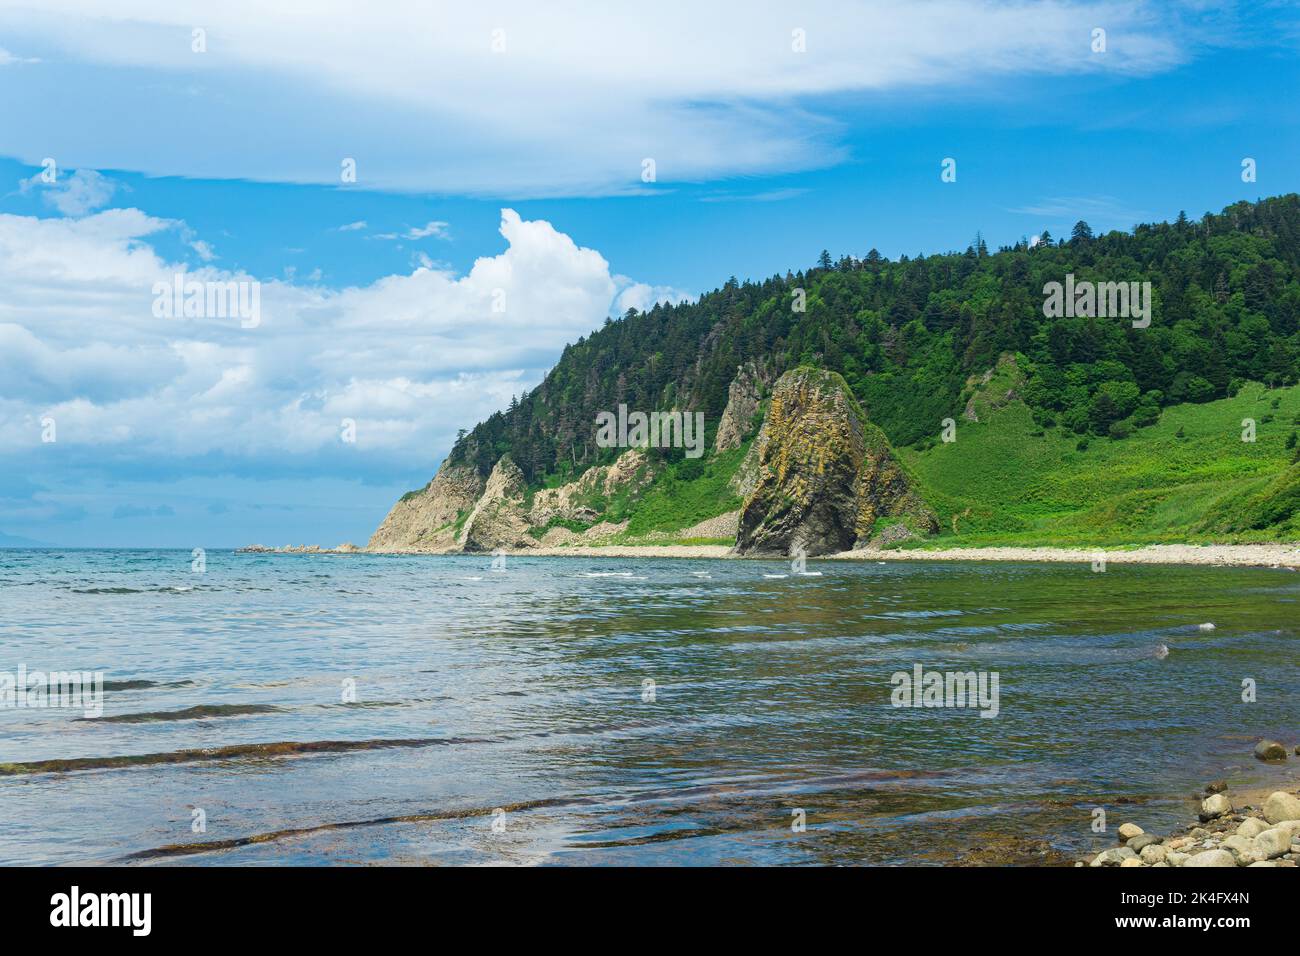 coastal landscape, rocky green coast of Kunashir island, sandy beach with algae on the littoral at low tide in the foreground Stock Photo